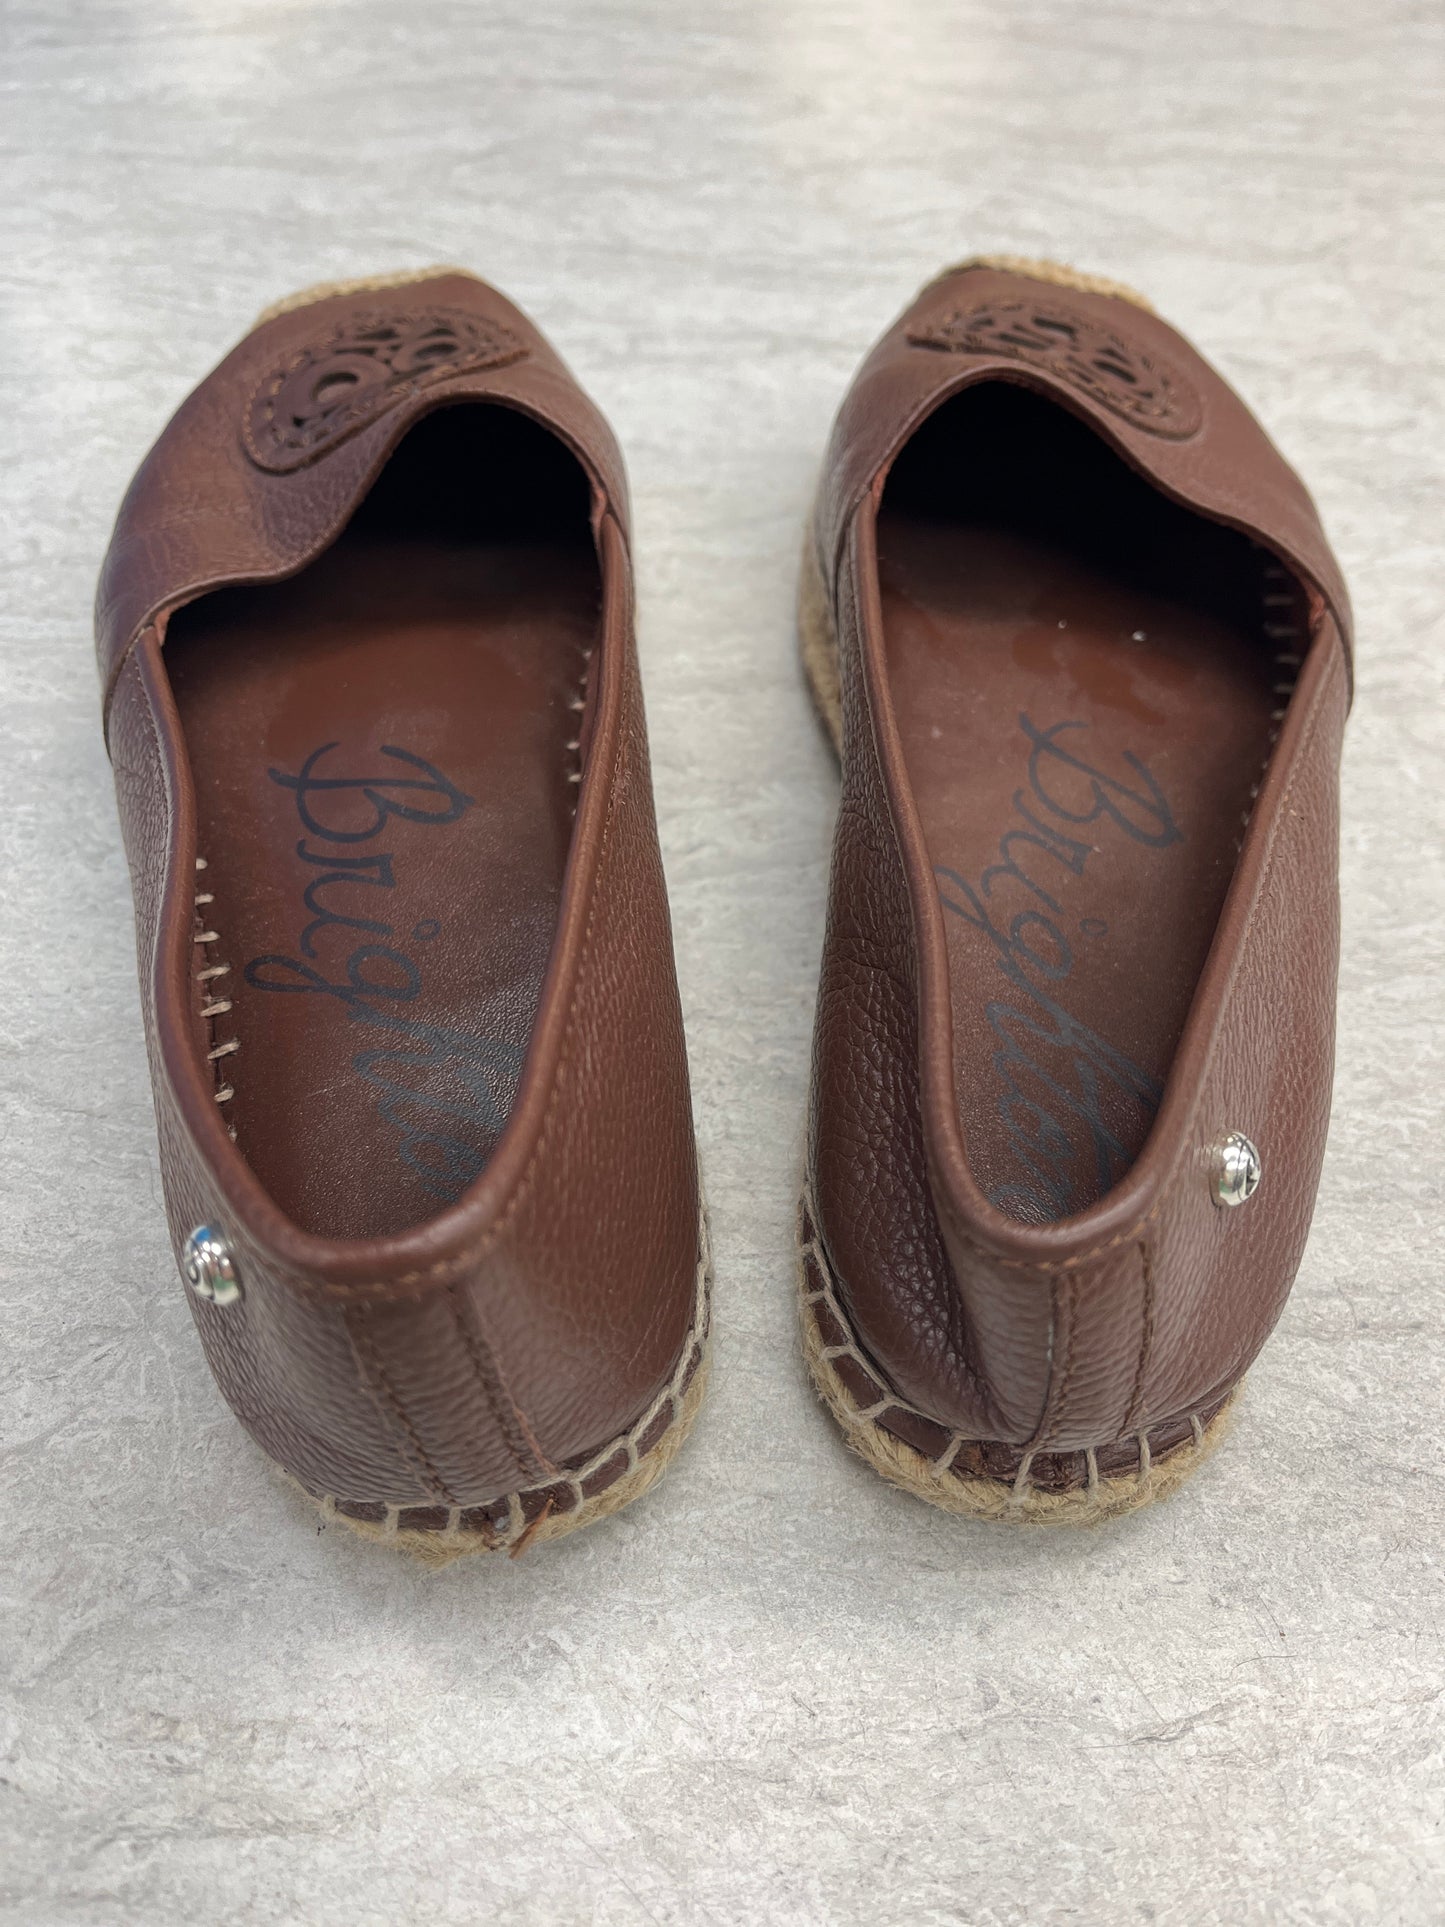 Brown Shoes Flats Brighton, Size 6